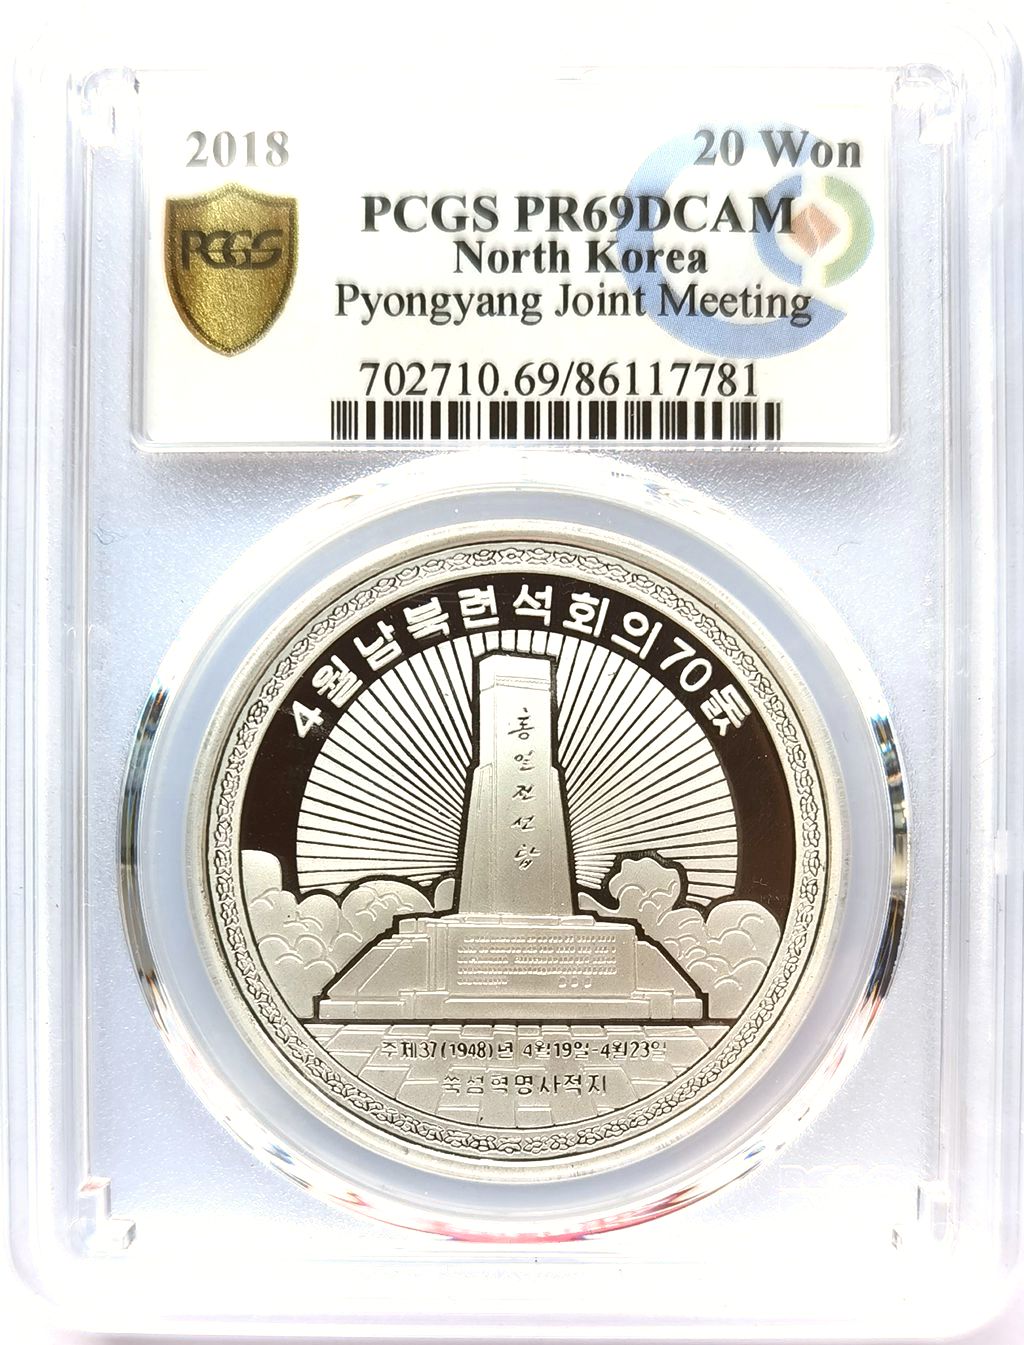 L3617, Korea Proof Silver Coin, "North-South Joint Meeting" 2018, PCGS PR69